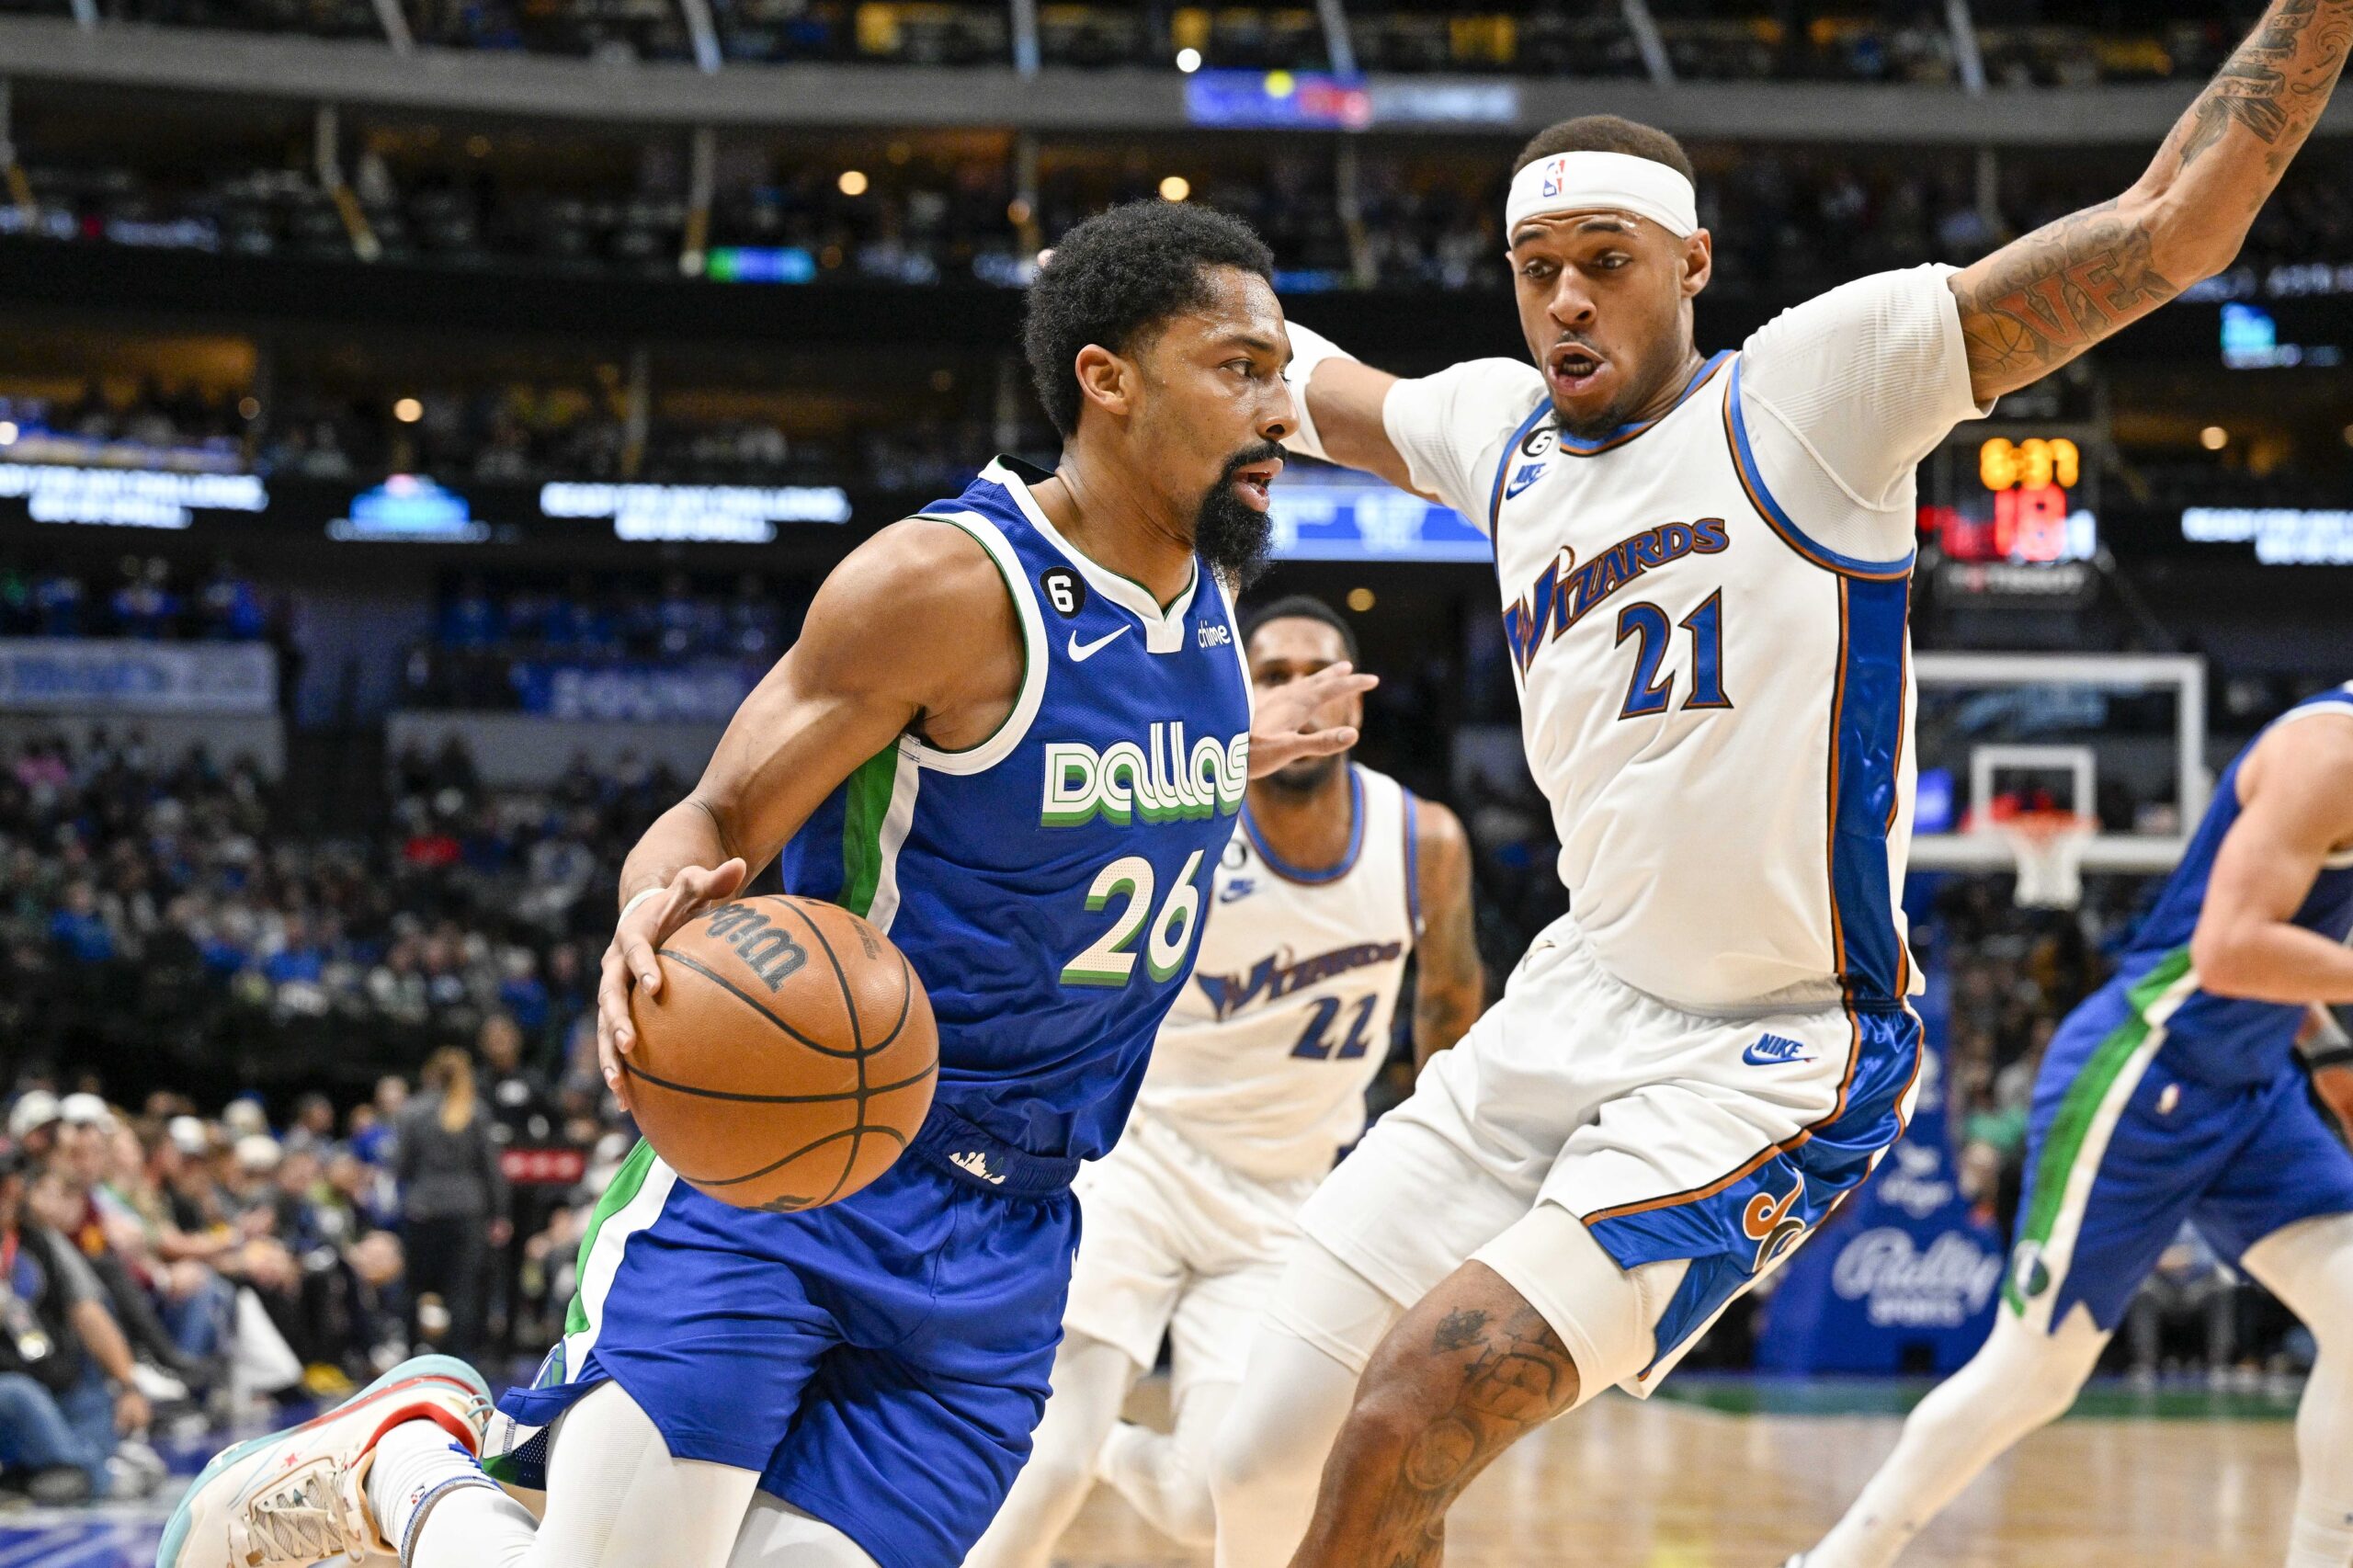 Jan 24, 2023; Dallas, Texas, USA; Dallas Mavericks guard Spencer Dinwiddie (26) drives to the basket past Washington Wizards center Daniel Gafford (21) during the first quarter at the American Airlines Center. Mandatory Credit: Jerome Miron-USA TODAY Sports